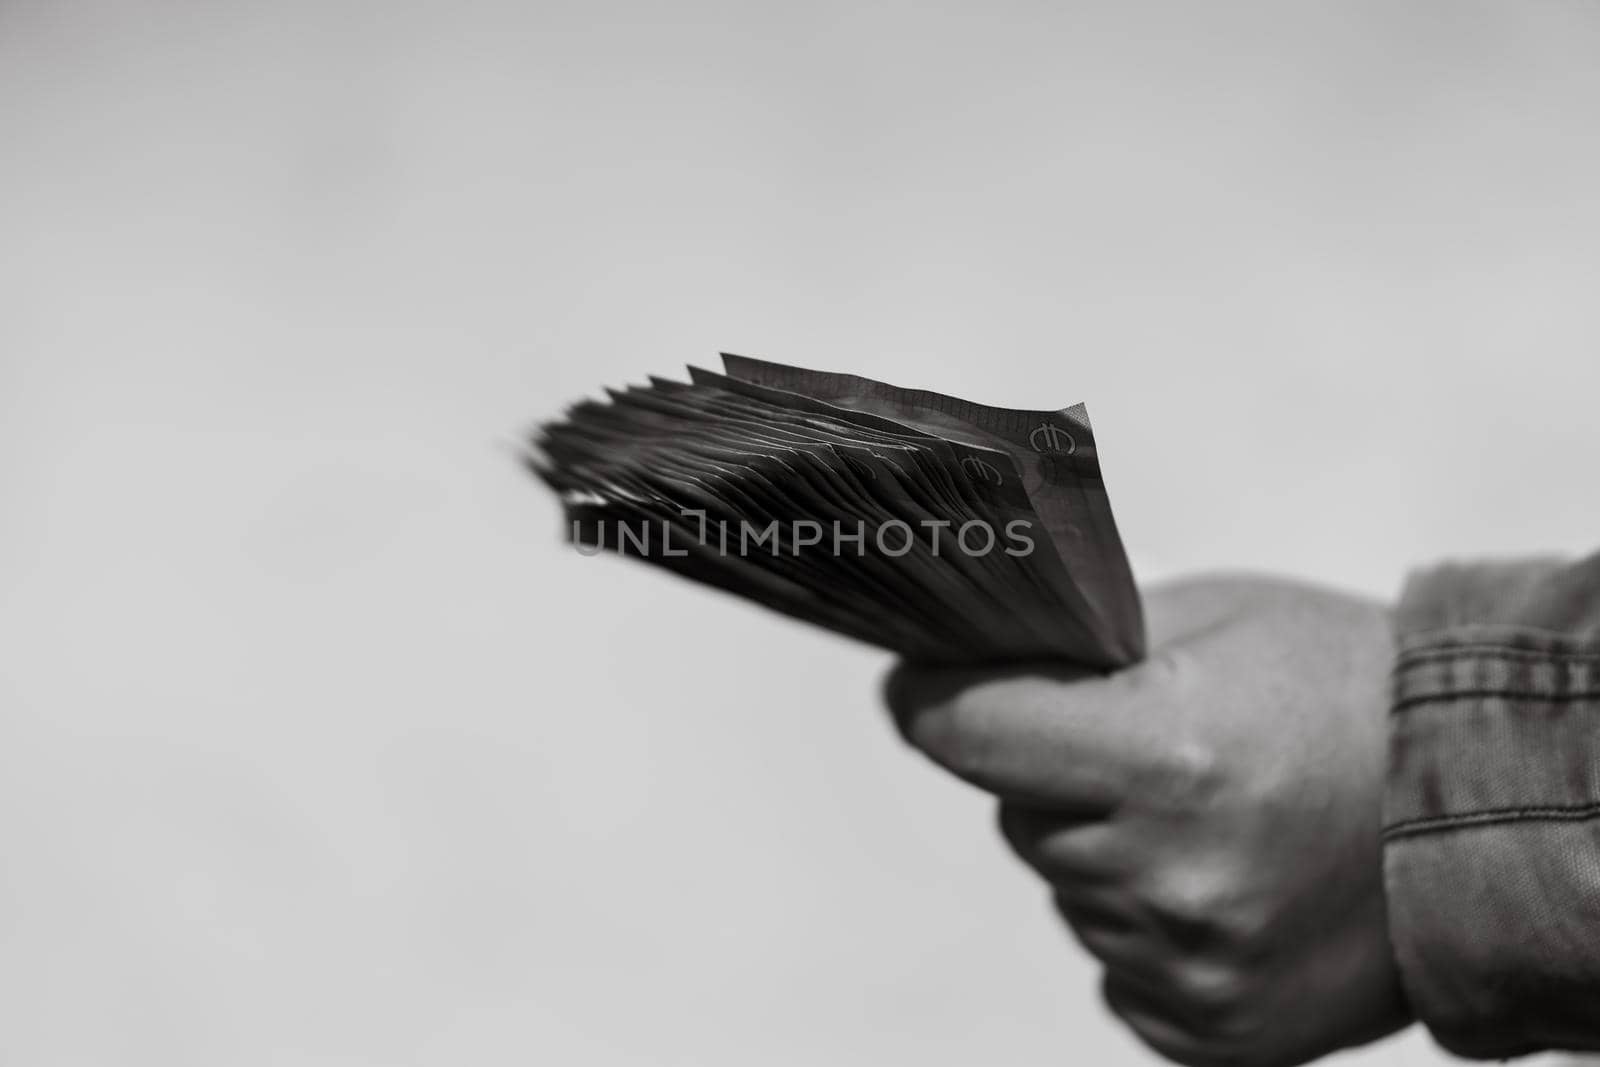 Man hand counting money for a bribe or tips. Holding EURO banknotes on a blurred background, EURO currency